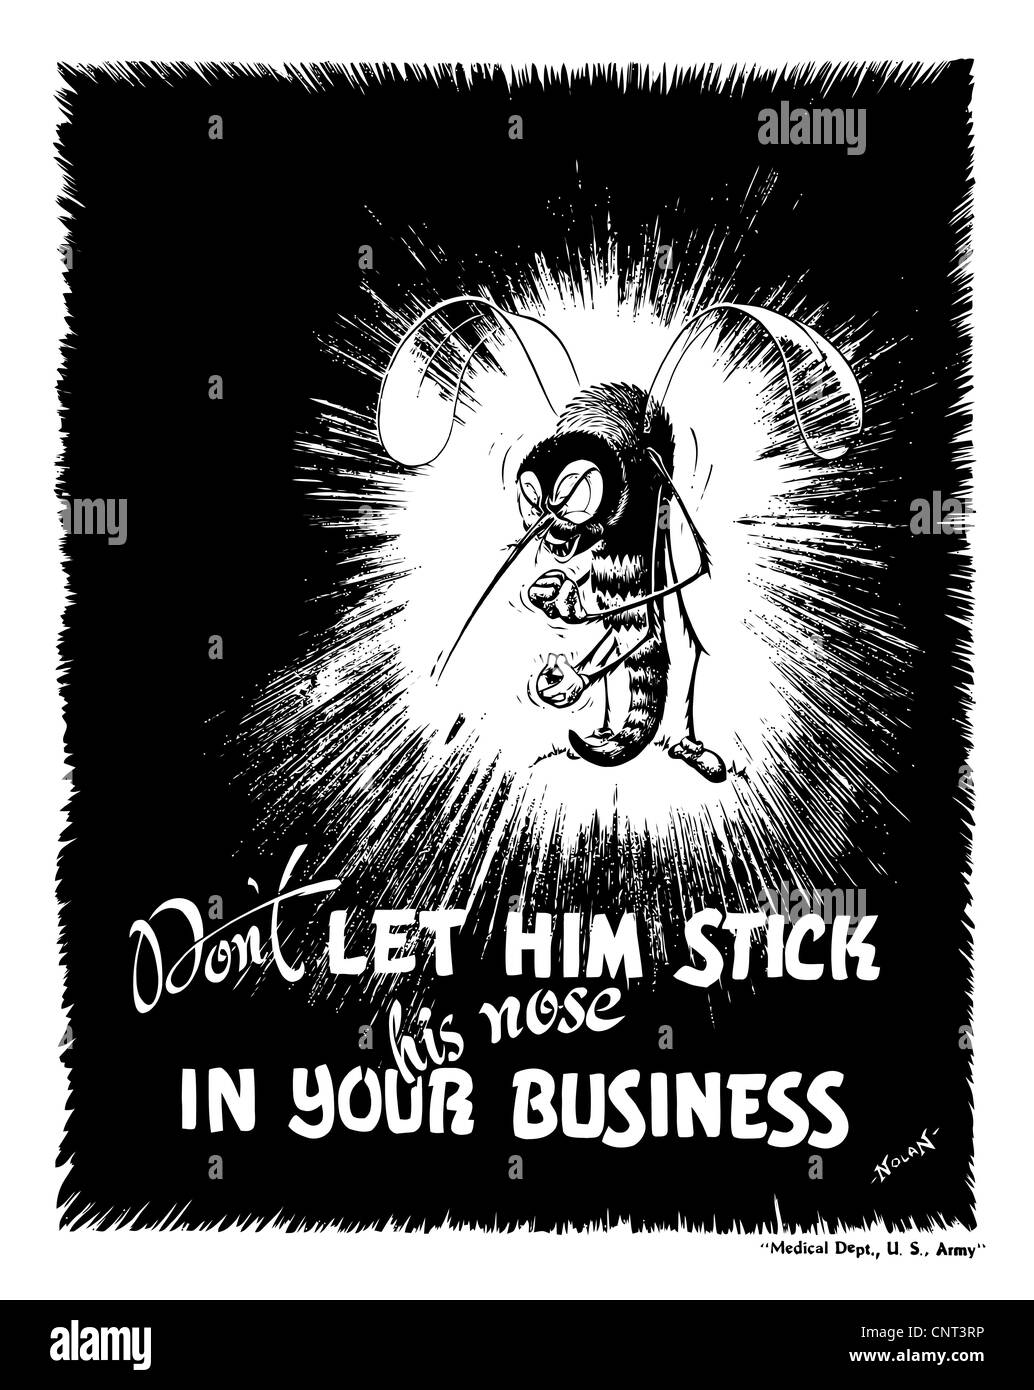 American wwii propaganda poster warning Black and White Stock Photos &  Images - Alamy